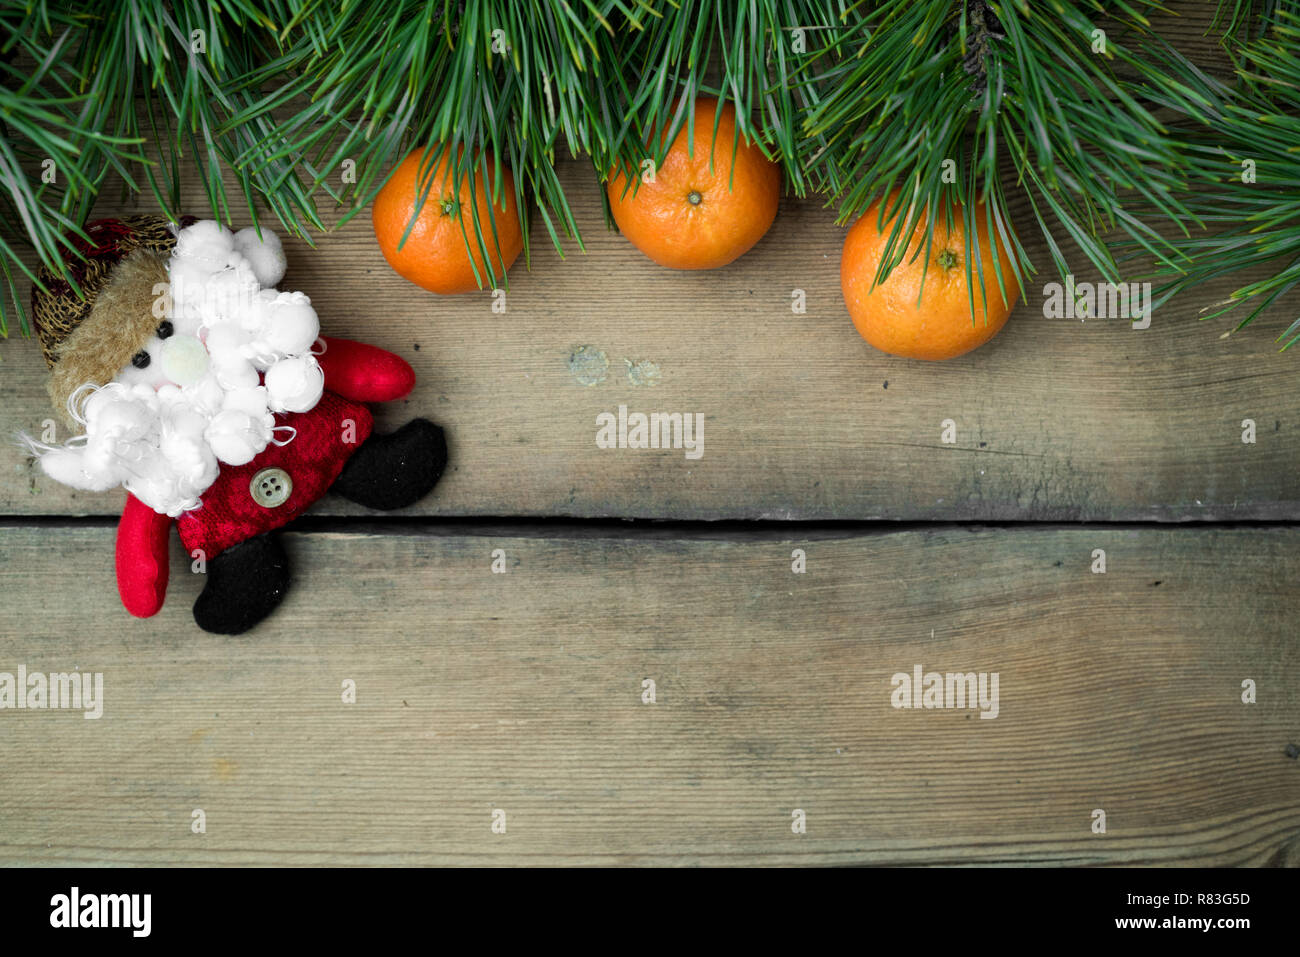 Christmas background 2018, 2019 of decorations on the board Stock Photo